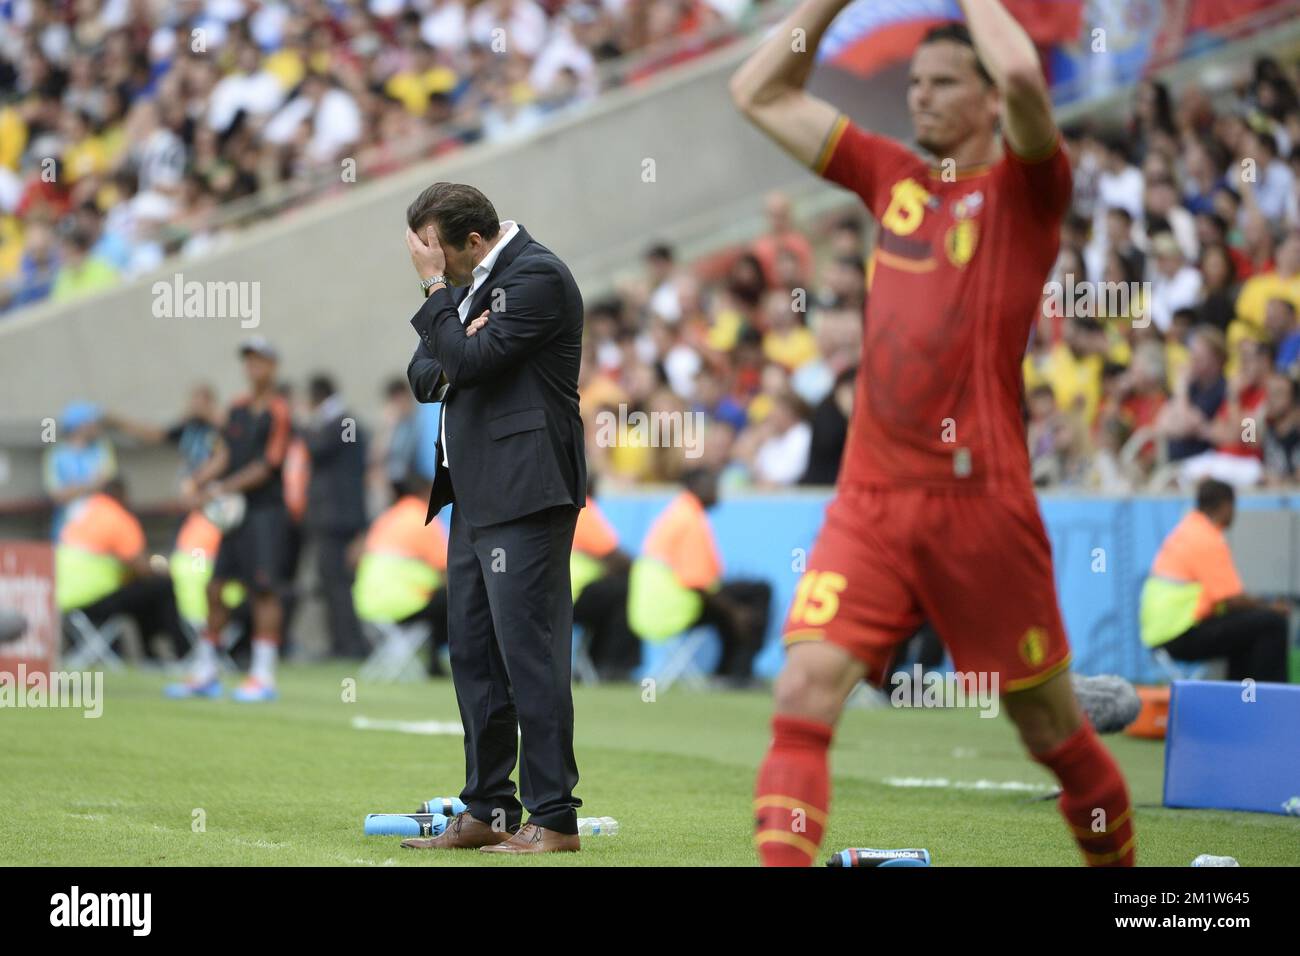 20140622 - RIO DE JANEIRO, BRAZIL: Belgium's head coach Marc Wilmots reacts during a soccer game between Belgian national team The Red Devils and Russia in Rio de Janeiro, Brazil, the second game in Group H of the first round of the 2014 FIFA World Cup, Sunday 22 June 2014.   BELGA PHOTO DIRK WAEM Stock Photo